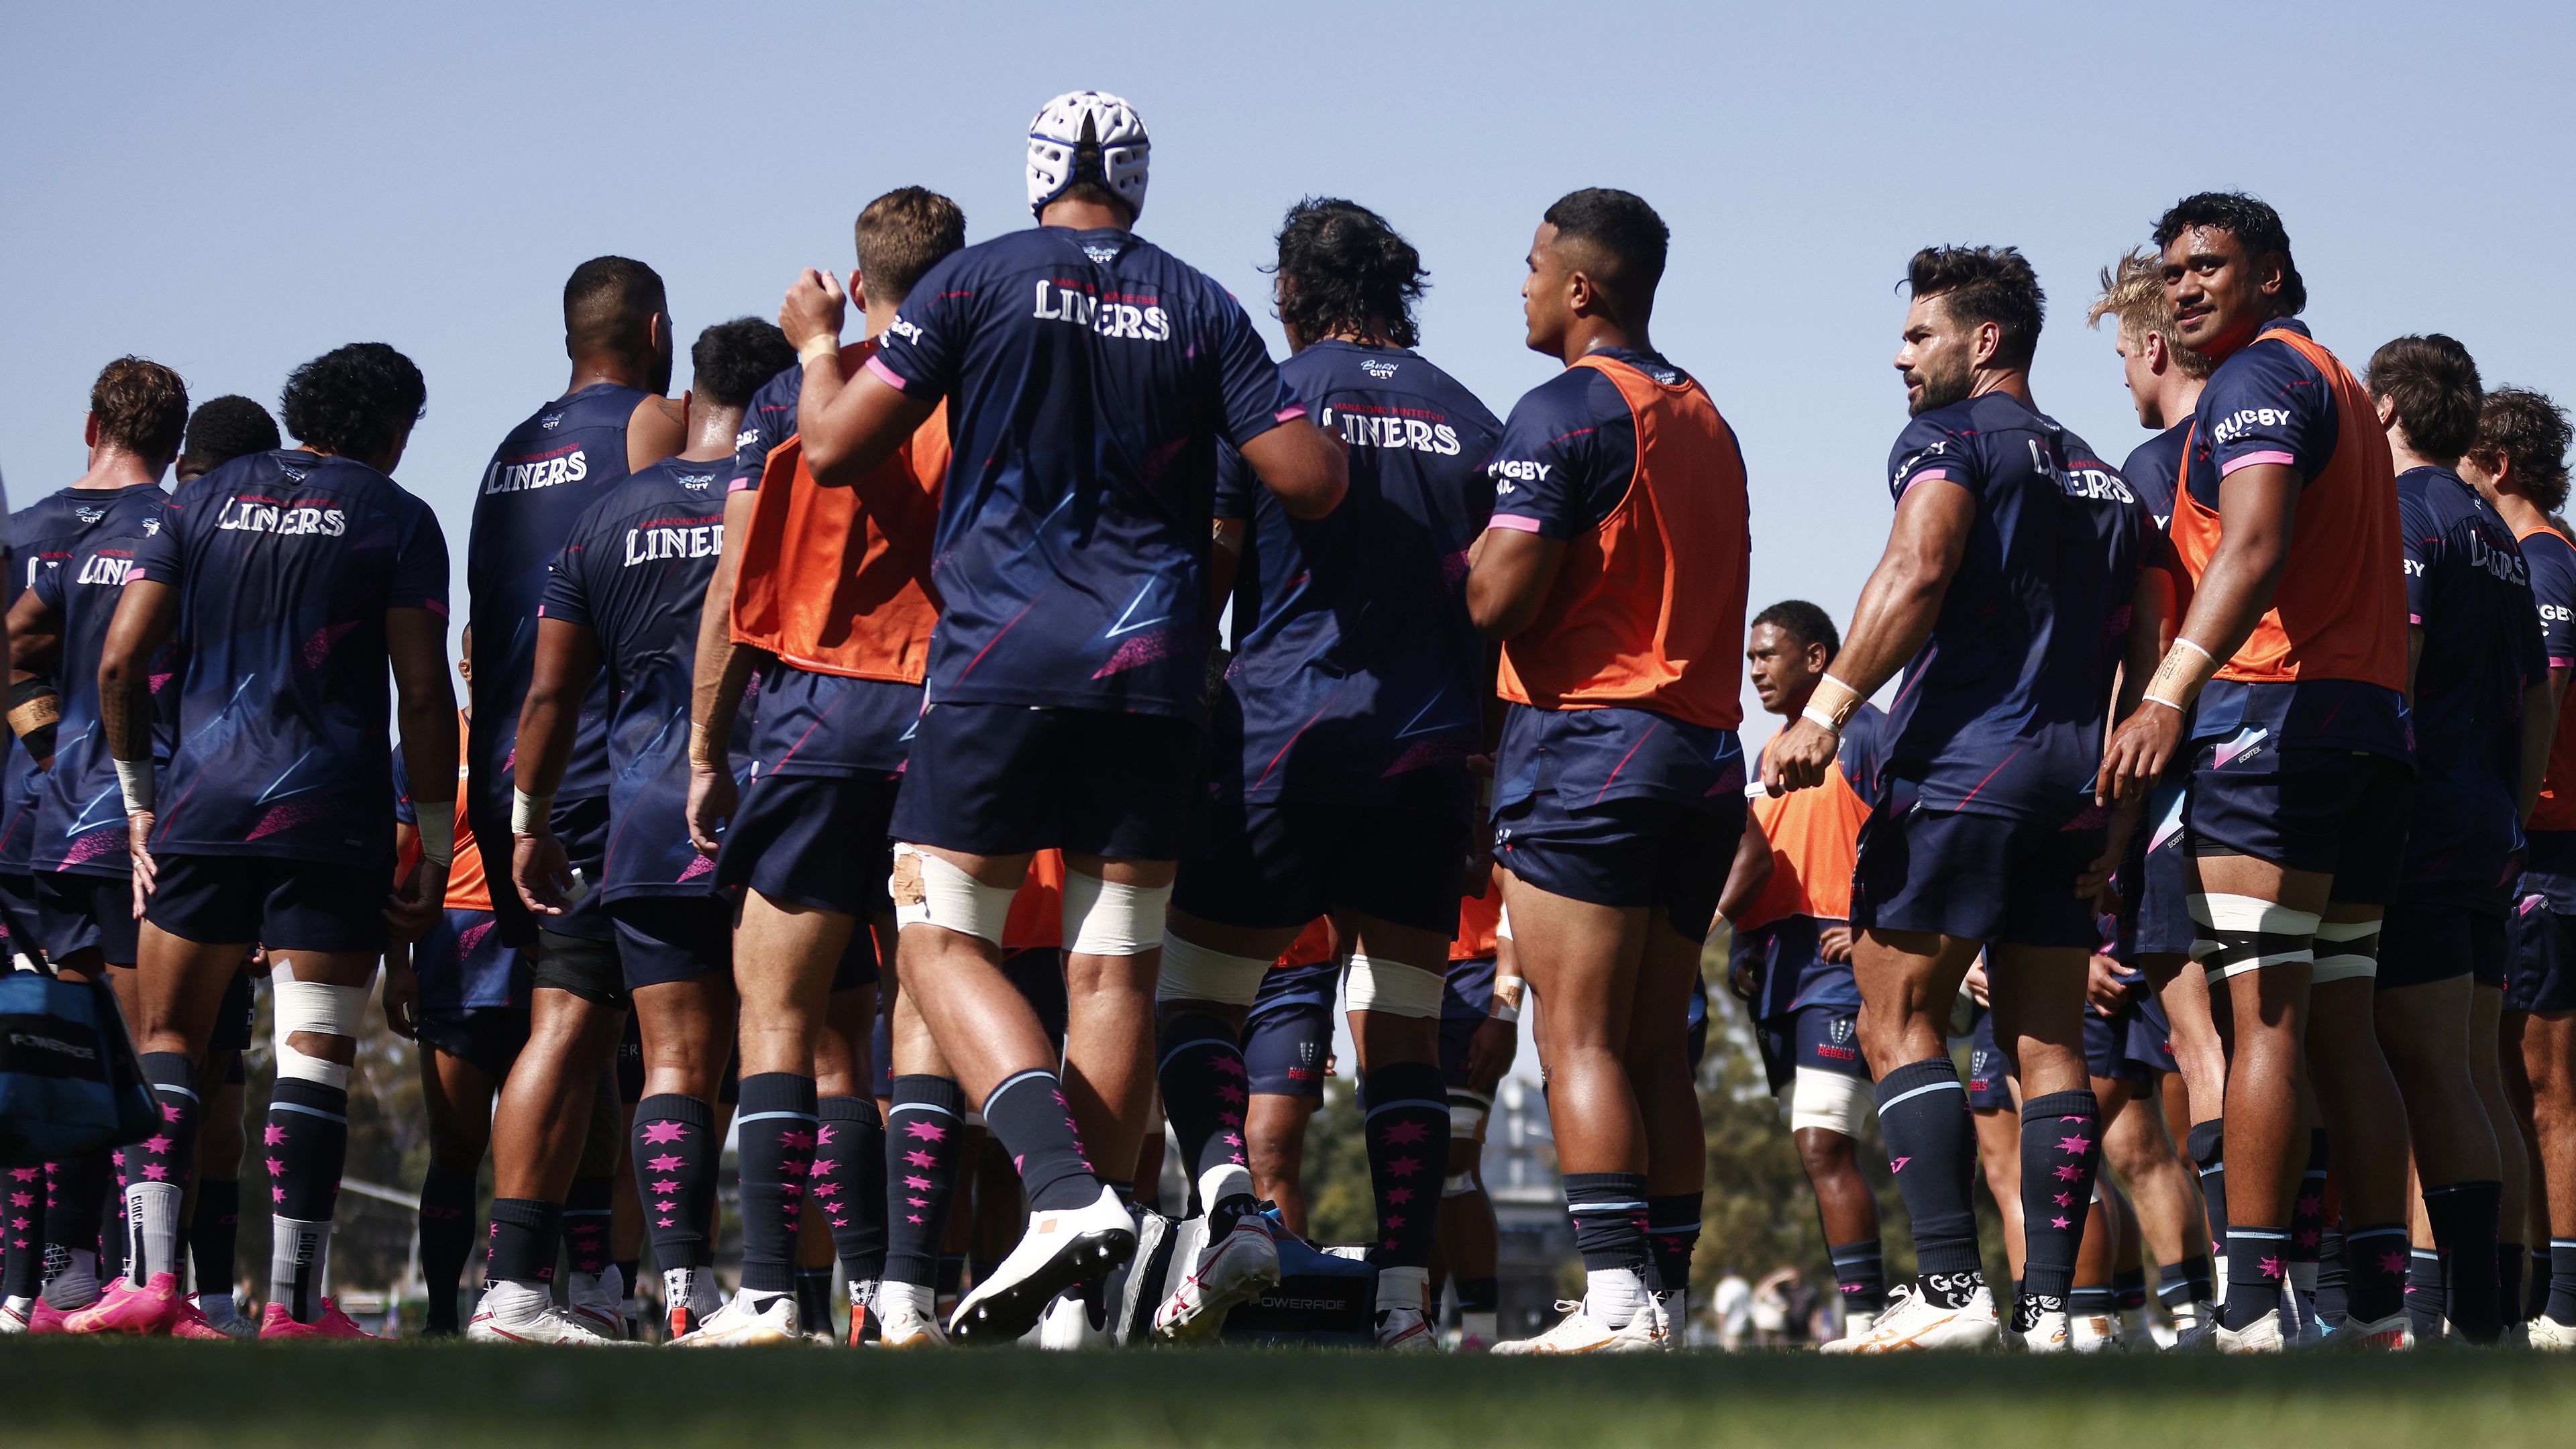 The Rebels huddle during a Super Rugby Pacific warm-up match.